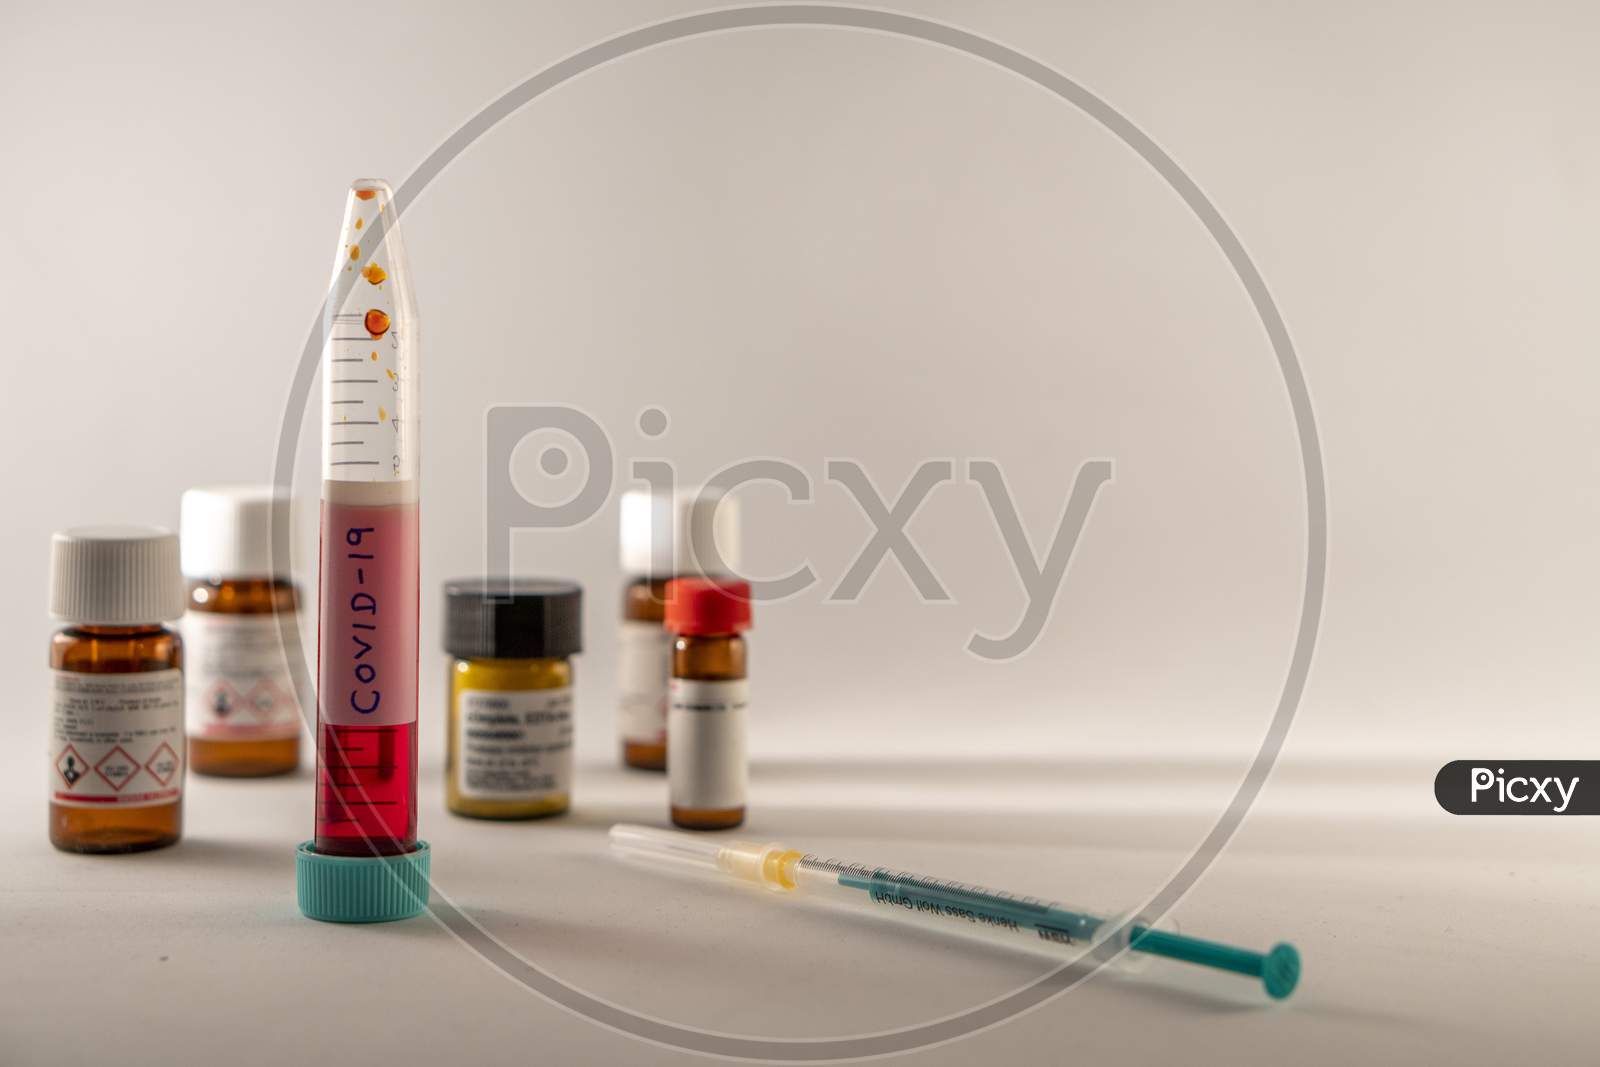 Photo concept shows Covid-19 sample in a falcon, and chemicals, and syringe in a blurred background.